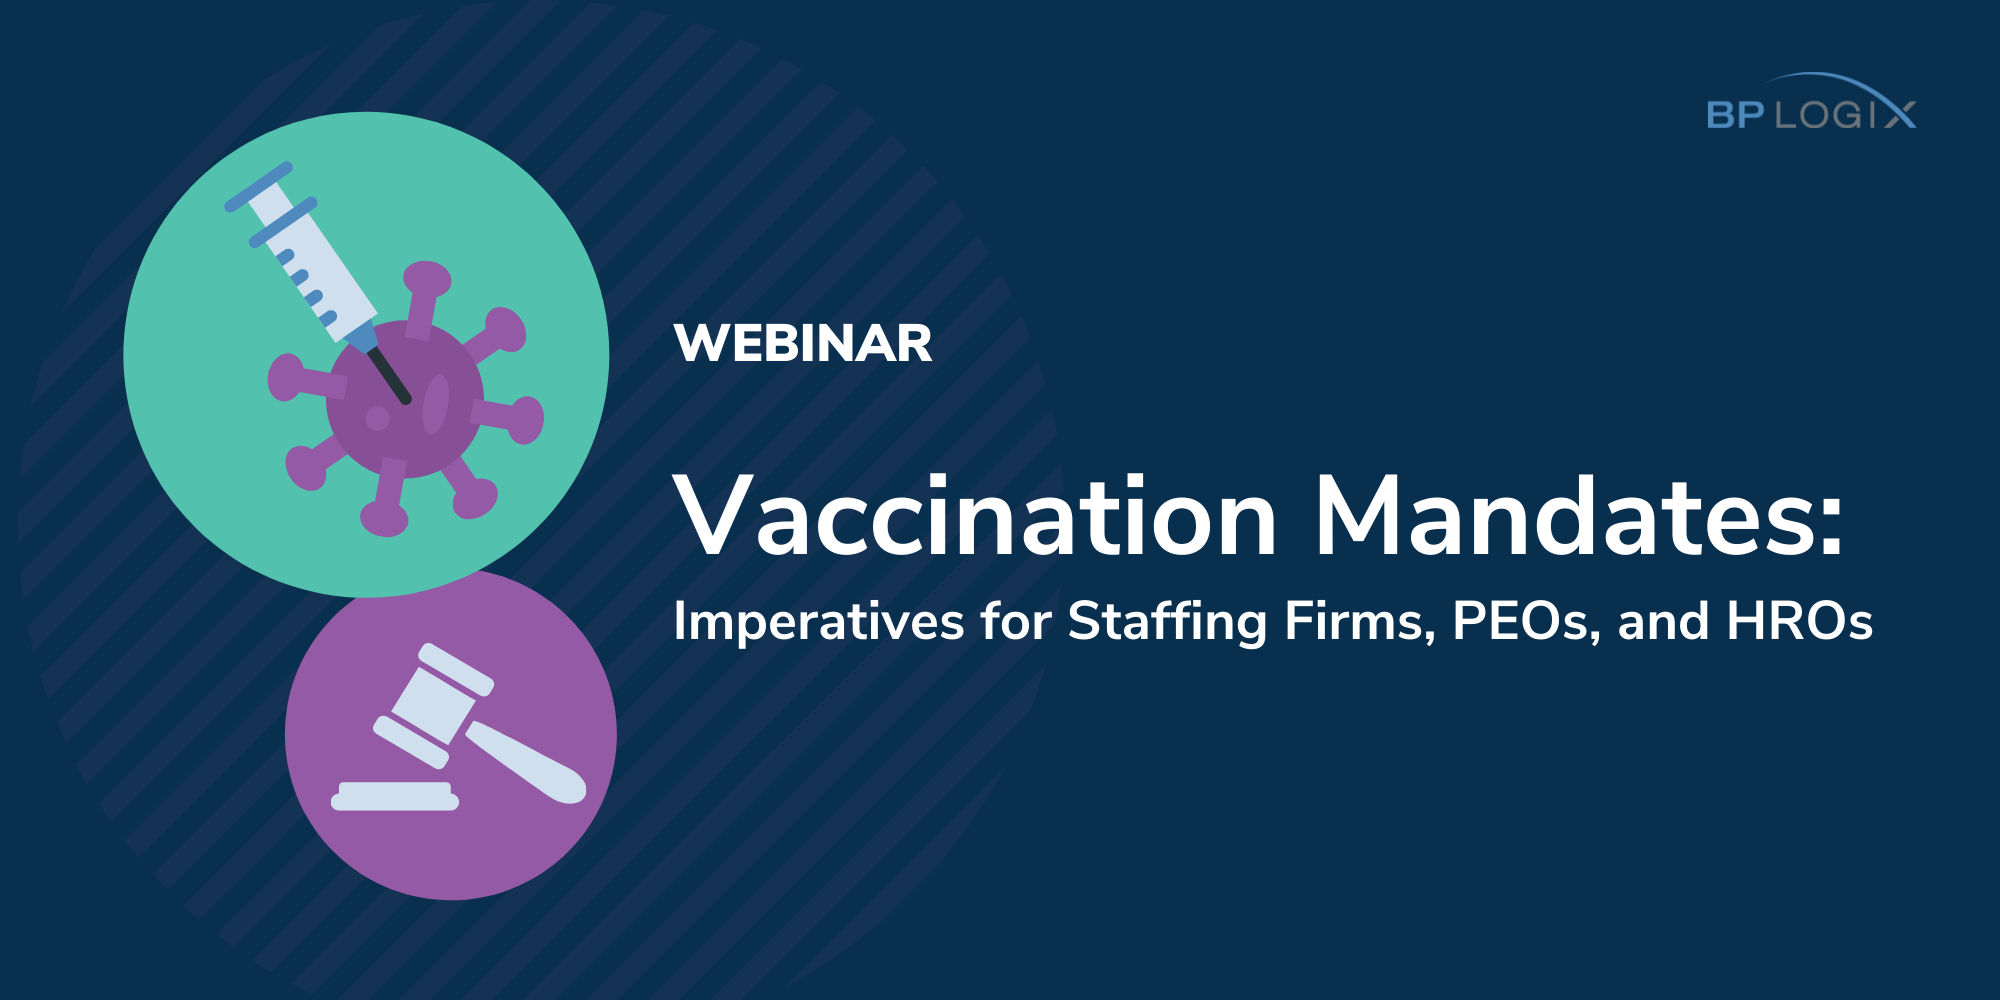 Read previous post: Vaccination Mandates for Staffing Firms, PEOs, & HROs